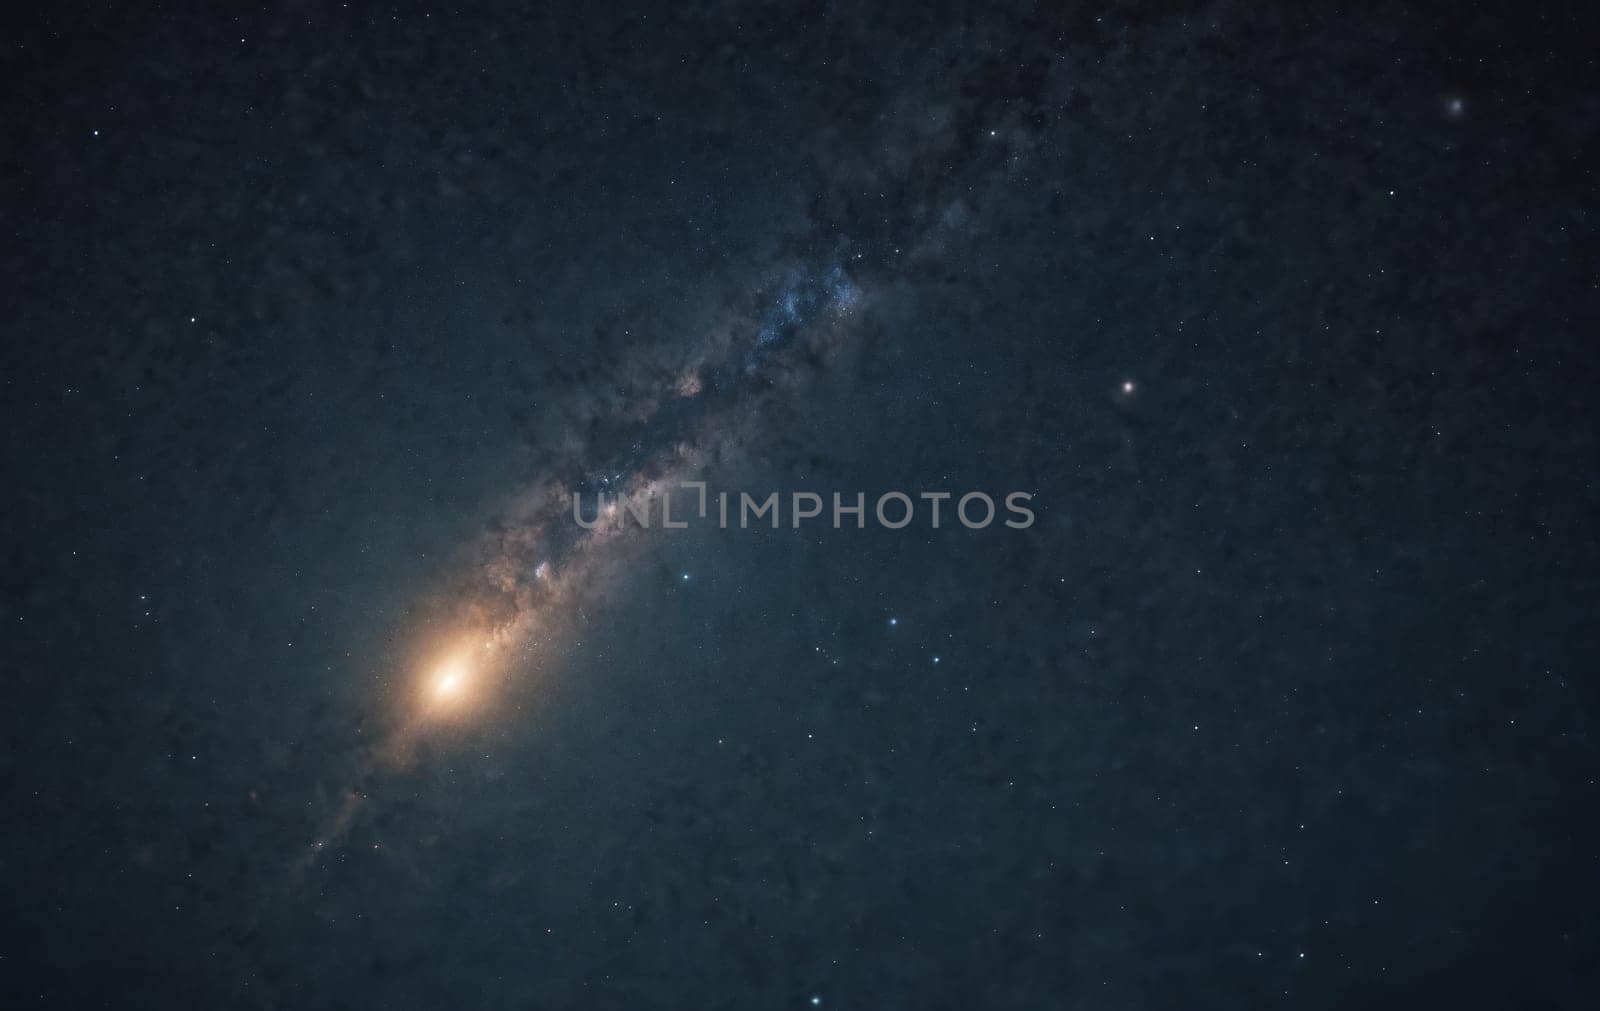 Astronomical object, Milky Way, visible in midnight sky by Andre1ns